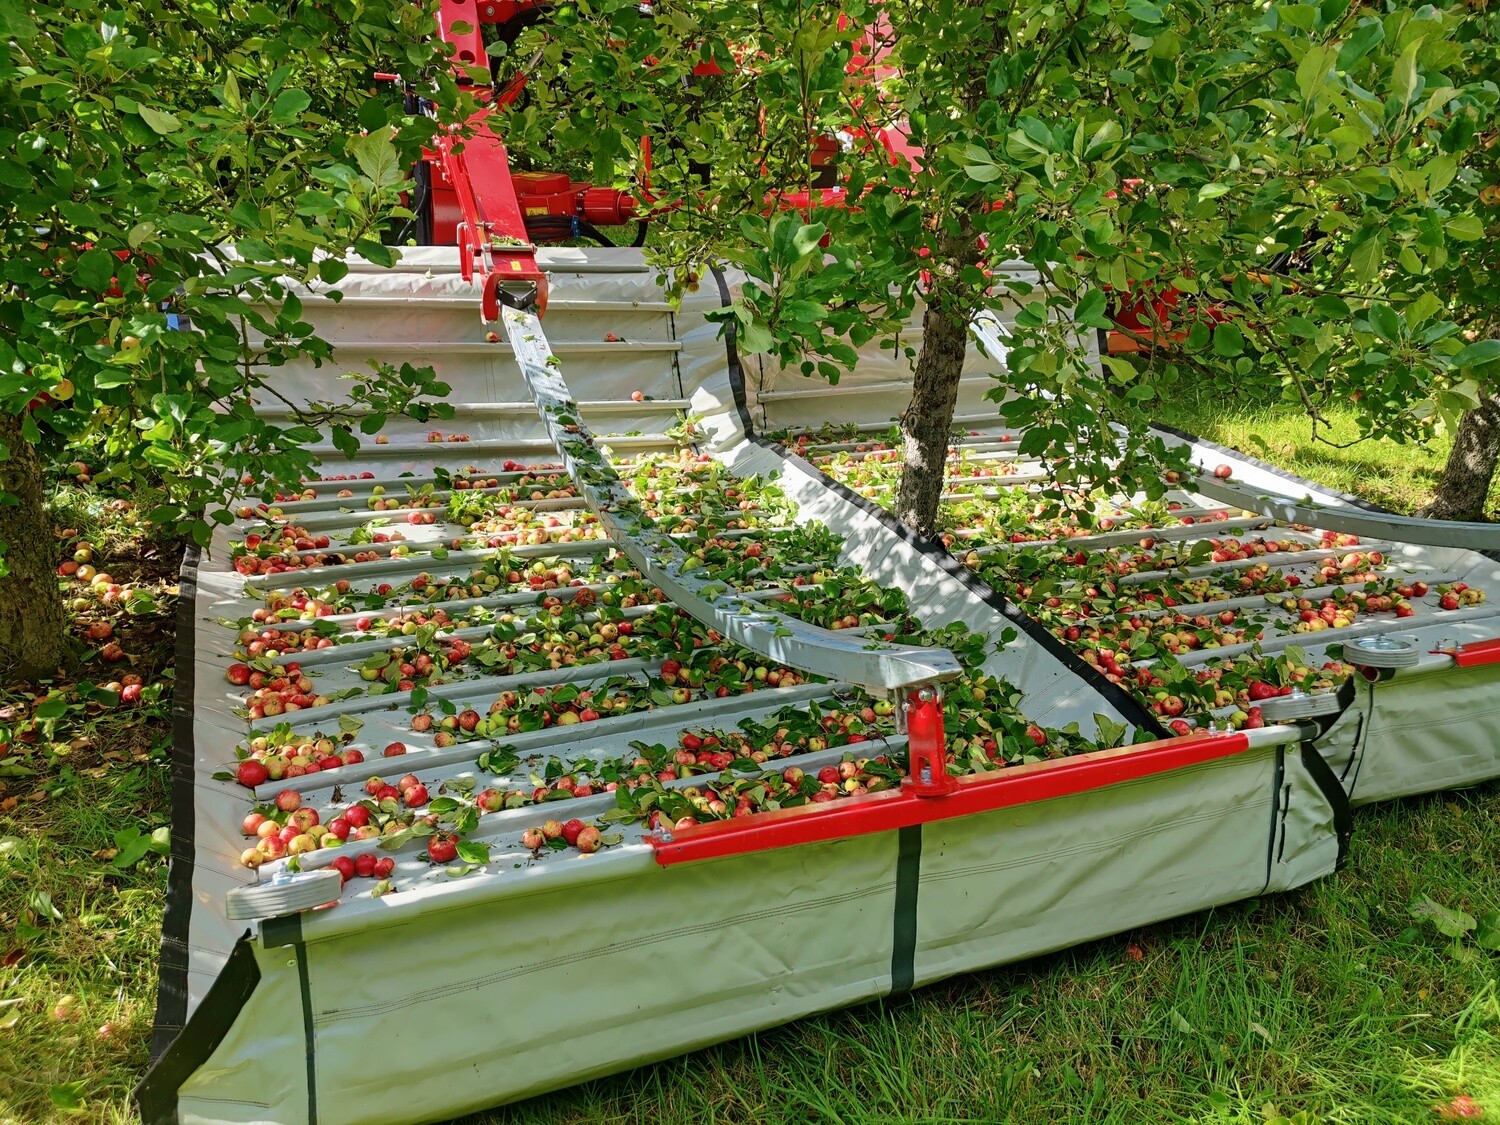 Bittersweet Apples in wooden bins Shake and Catch Harvested